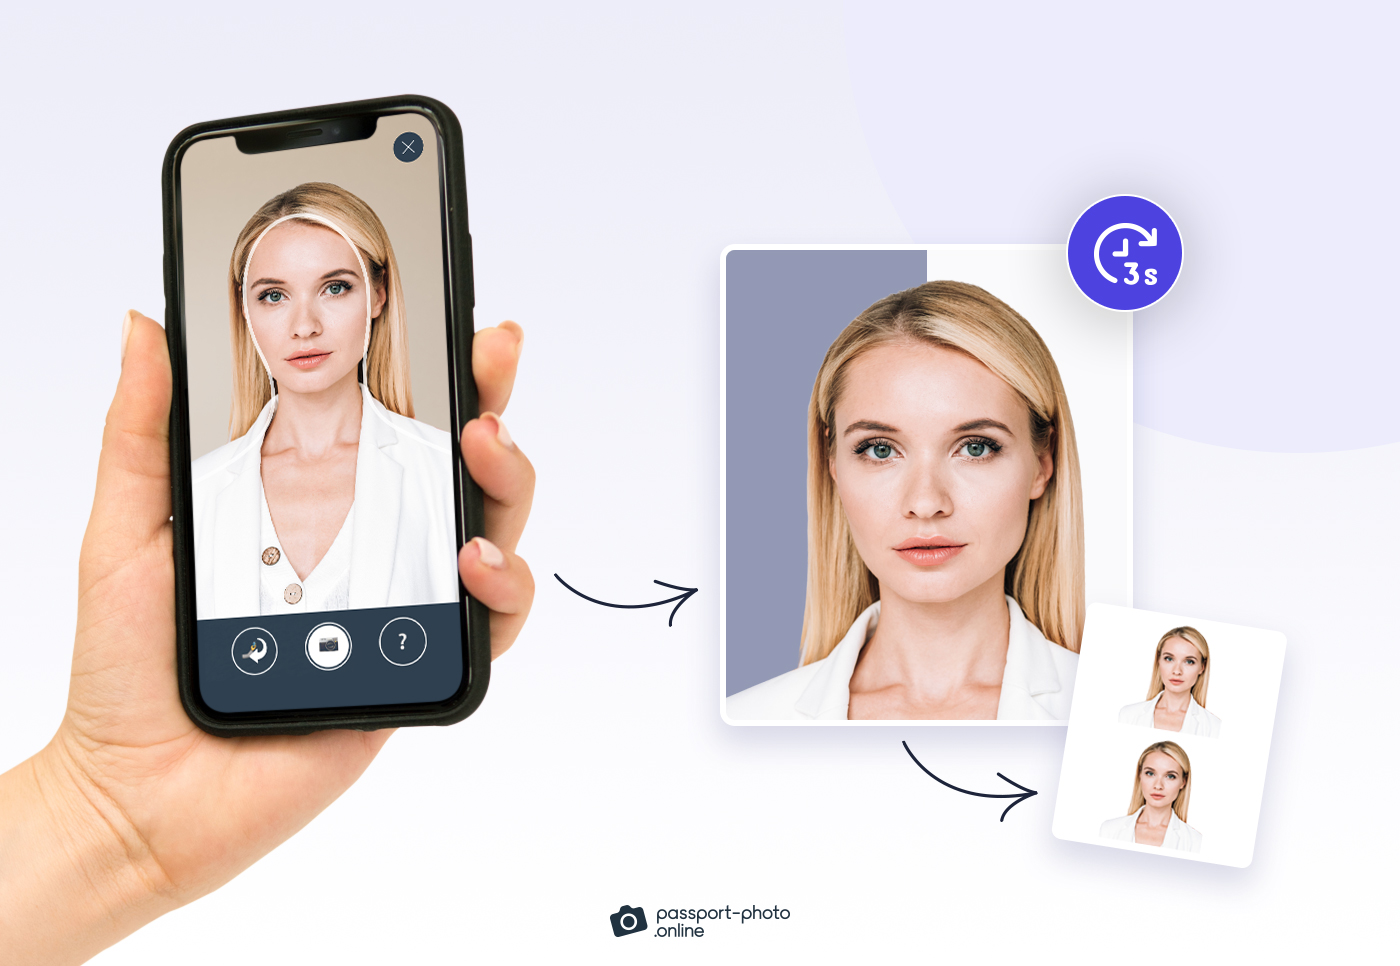 Get an instant $3 passport photo coupon using Passport Photo Online instead of getting your pictures at a national pharmacy chain.